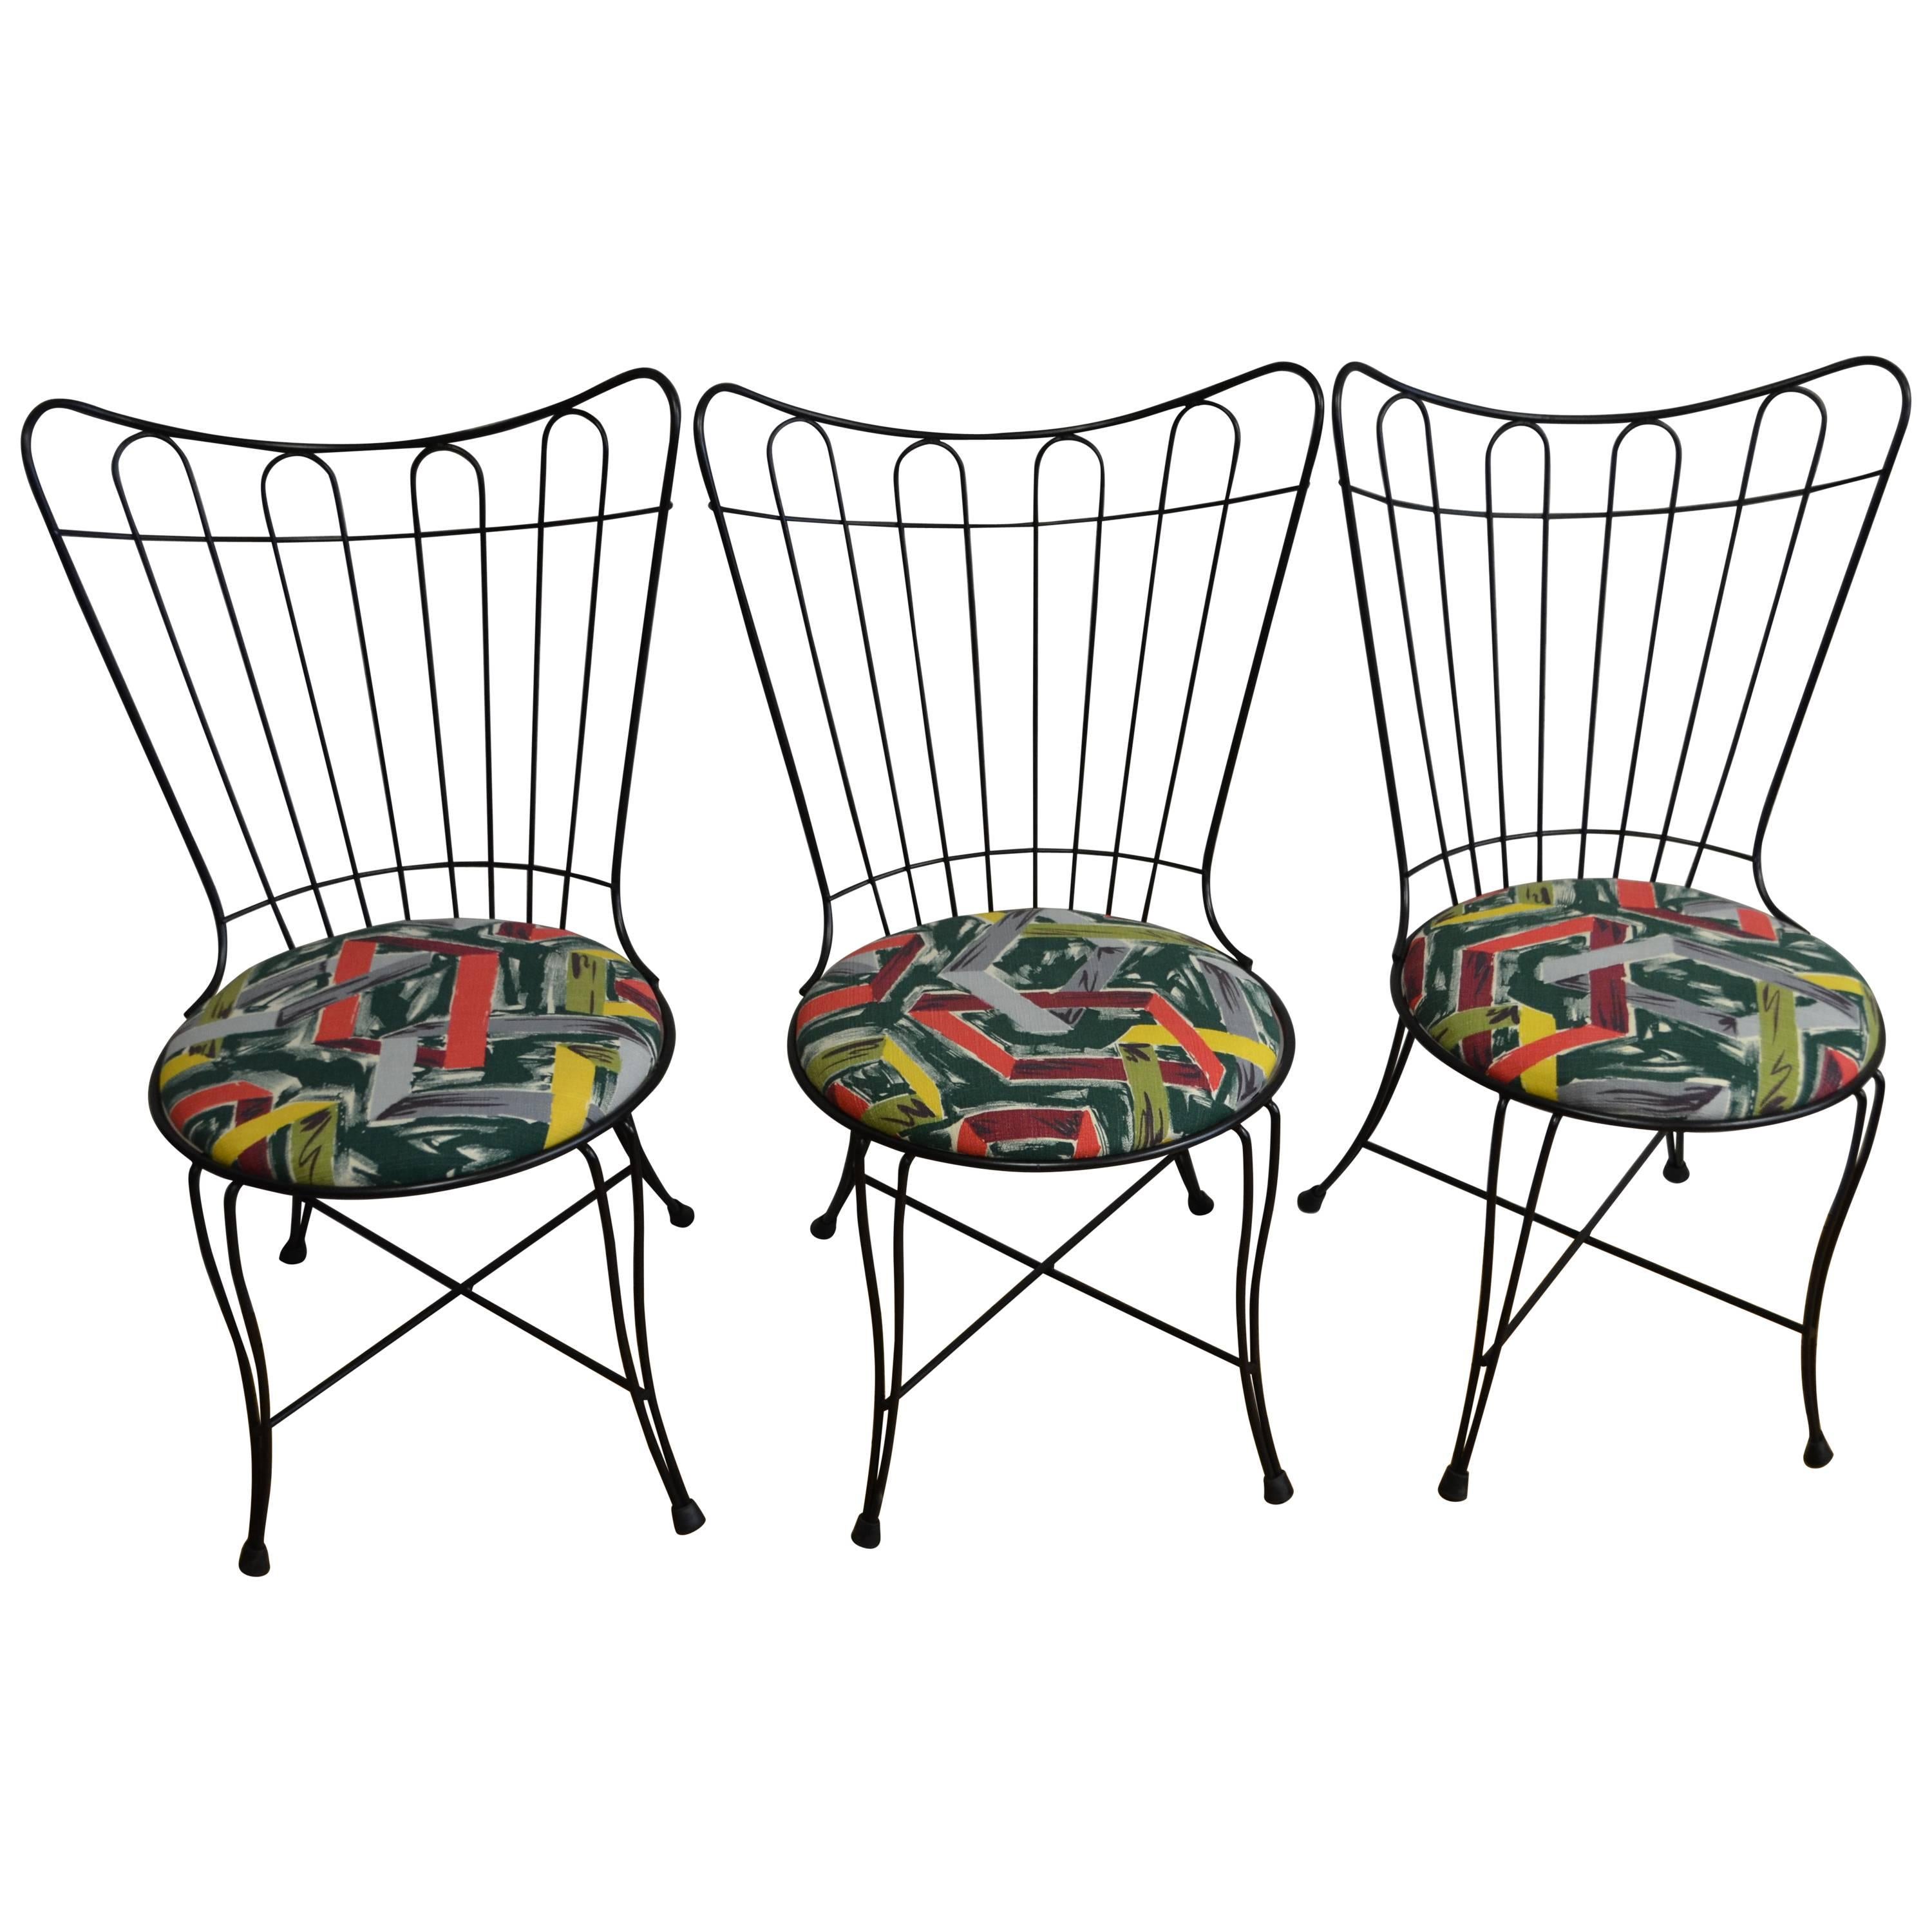 Patio Chairs by Salterini, 1950s with Removable Seats in Vintage Barkcloth